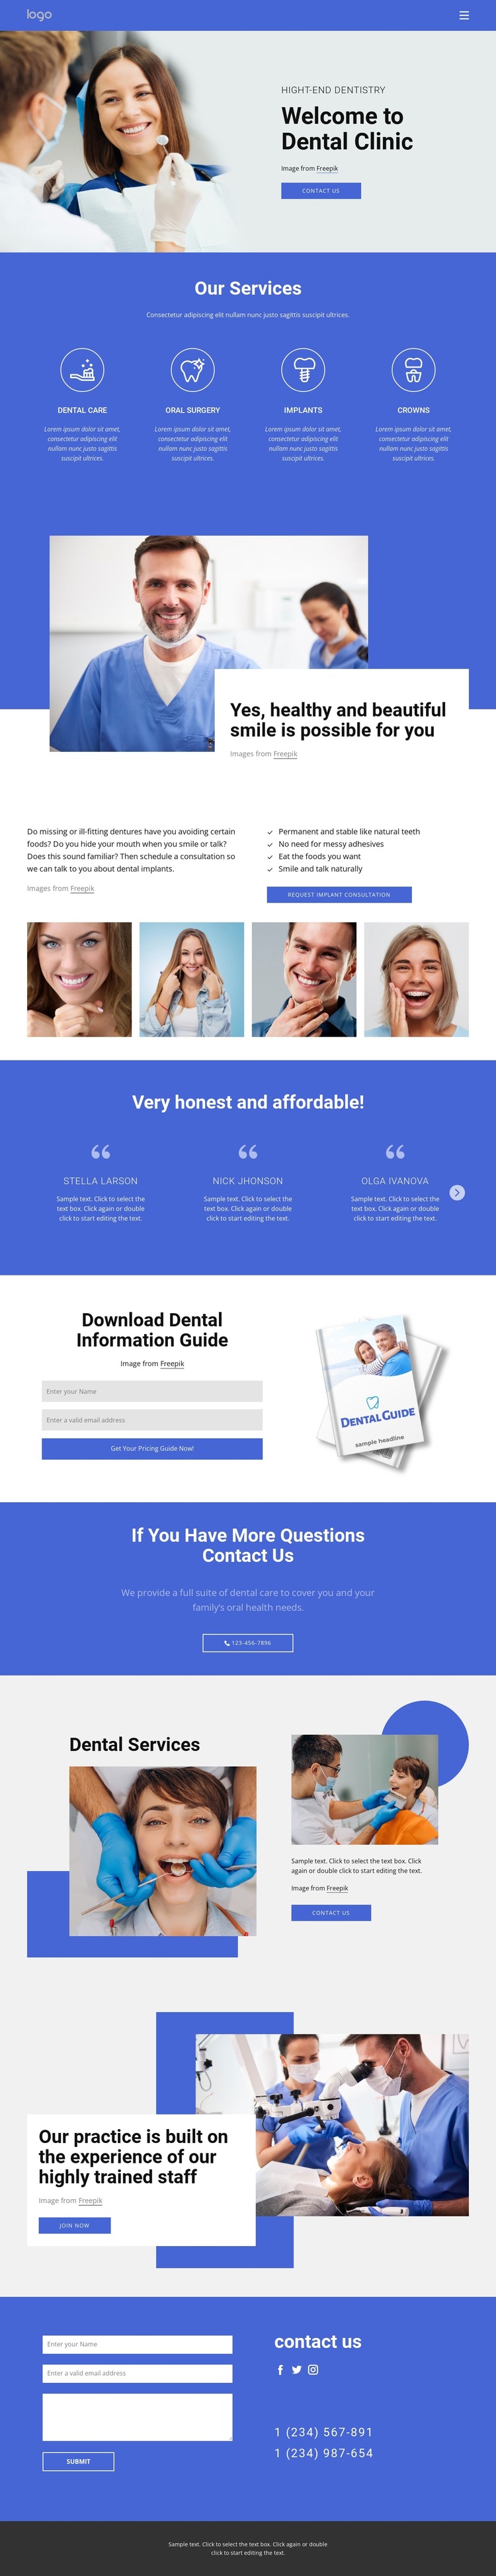 Welcome to dental clinic Joomla Page Builder